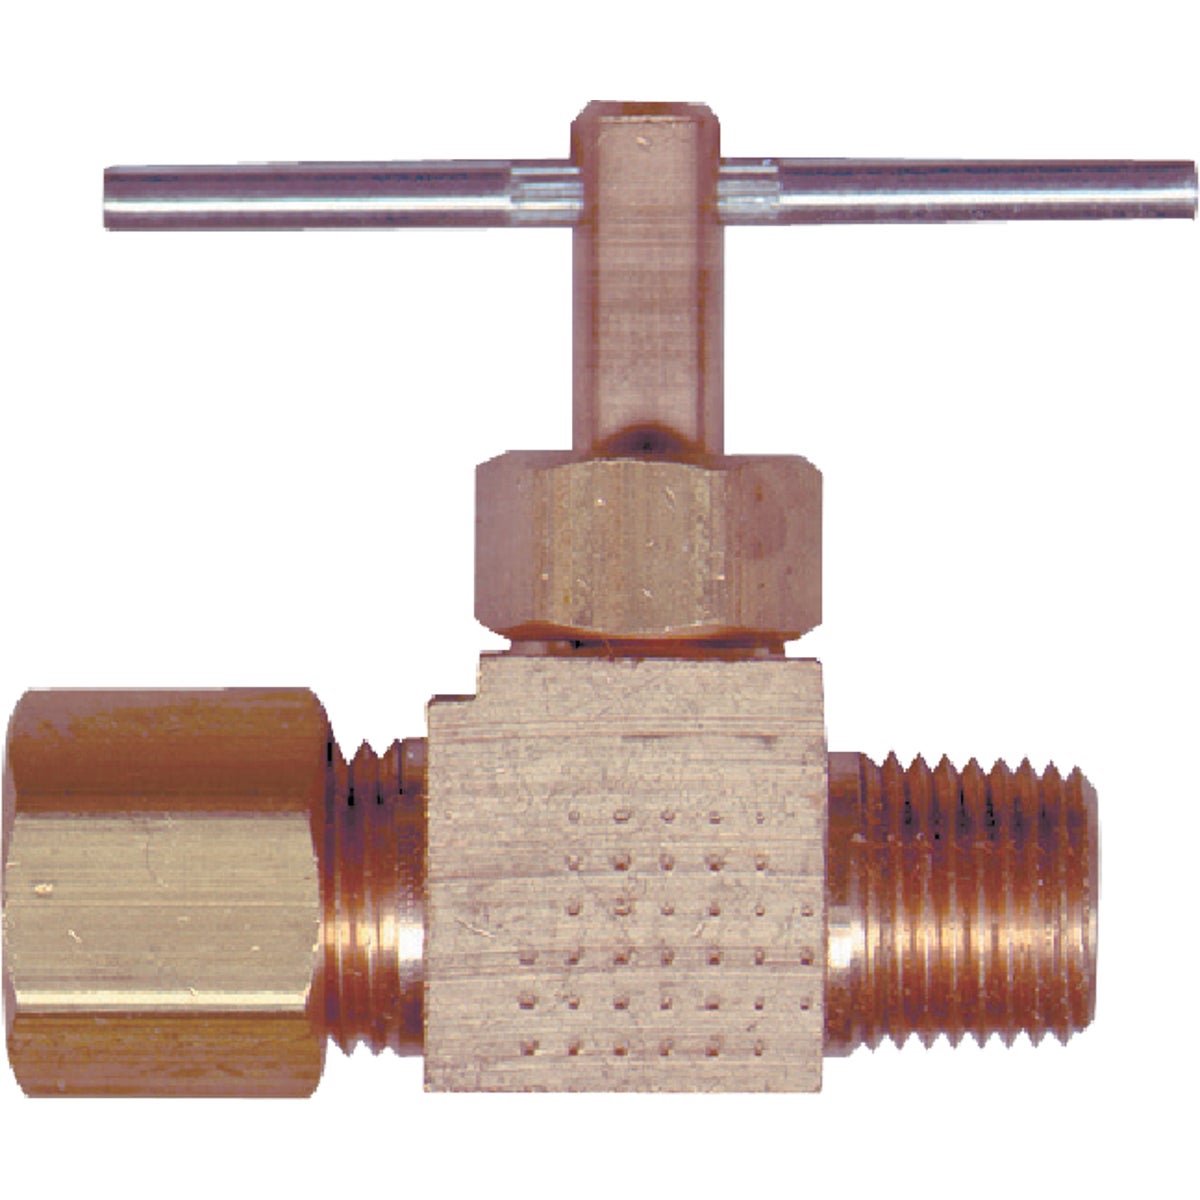 Item 455885, For 1/8" Male pipe thread x 1/4" O.D. tube. Brass.